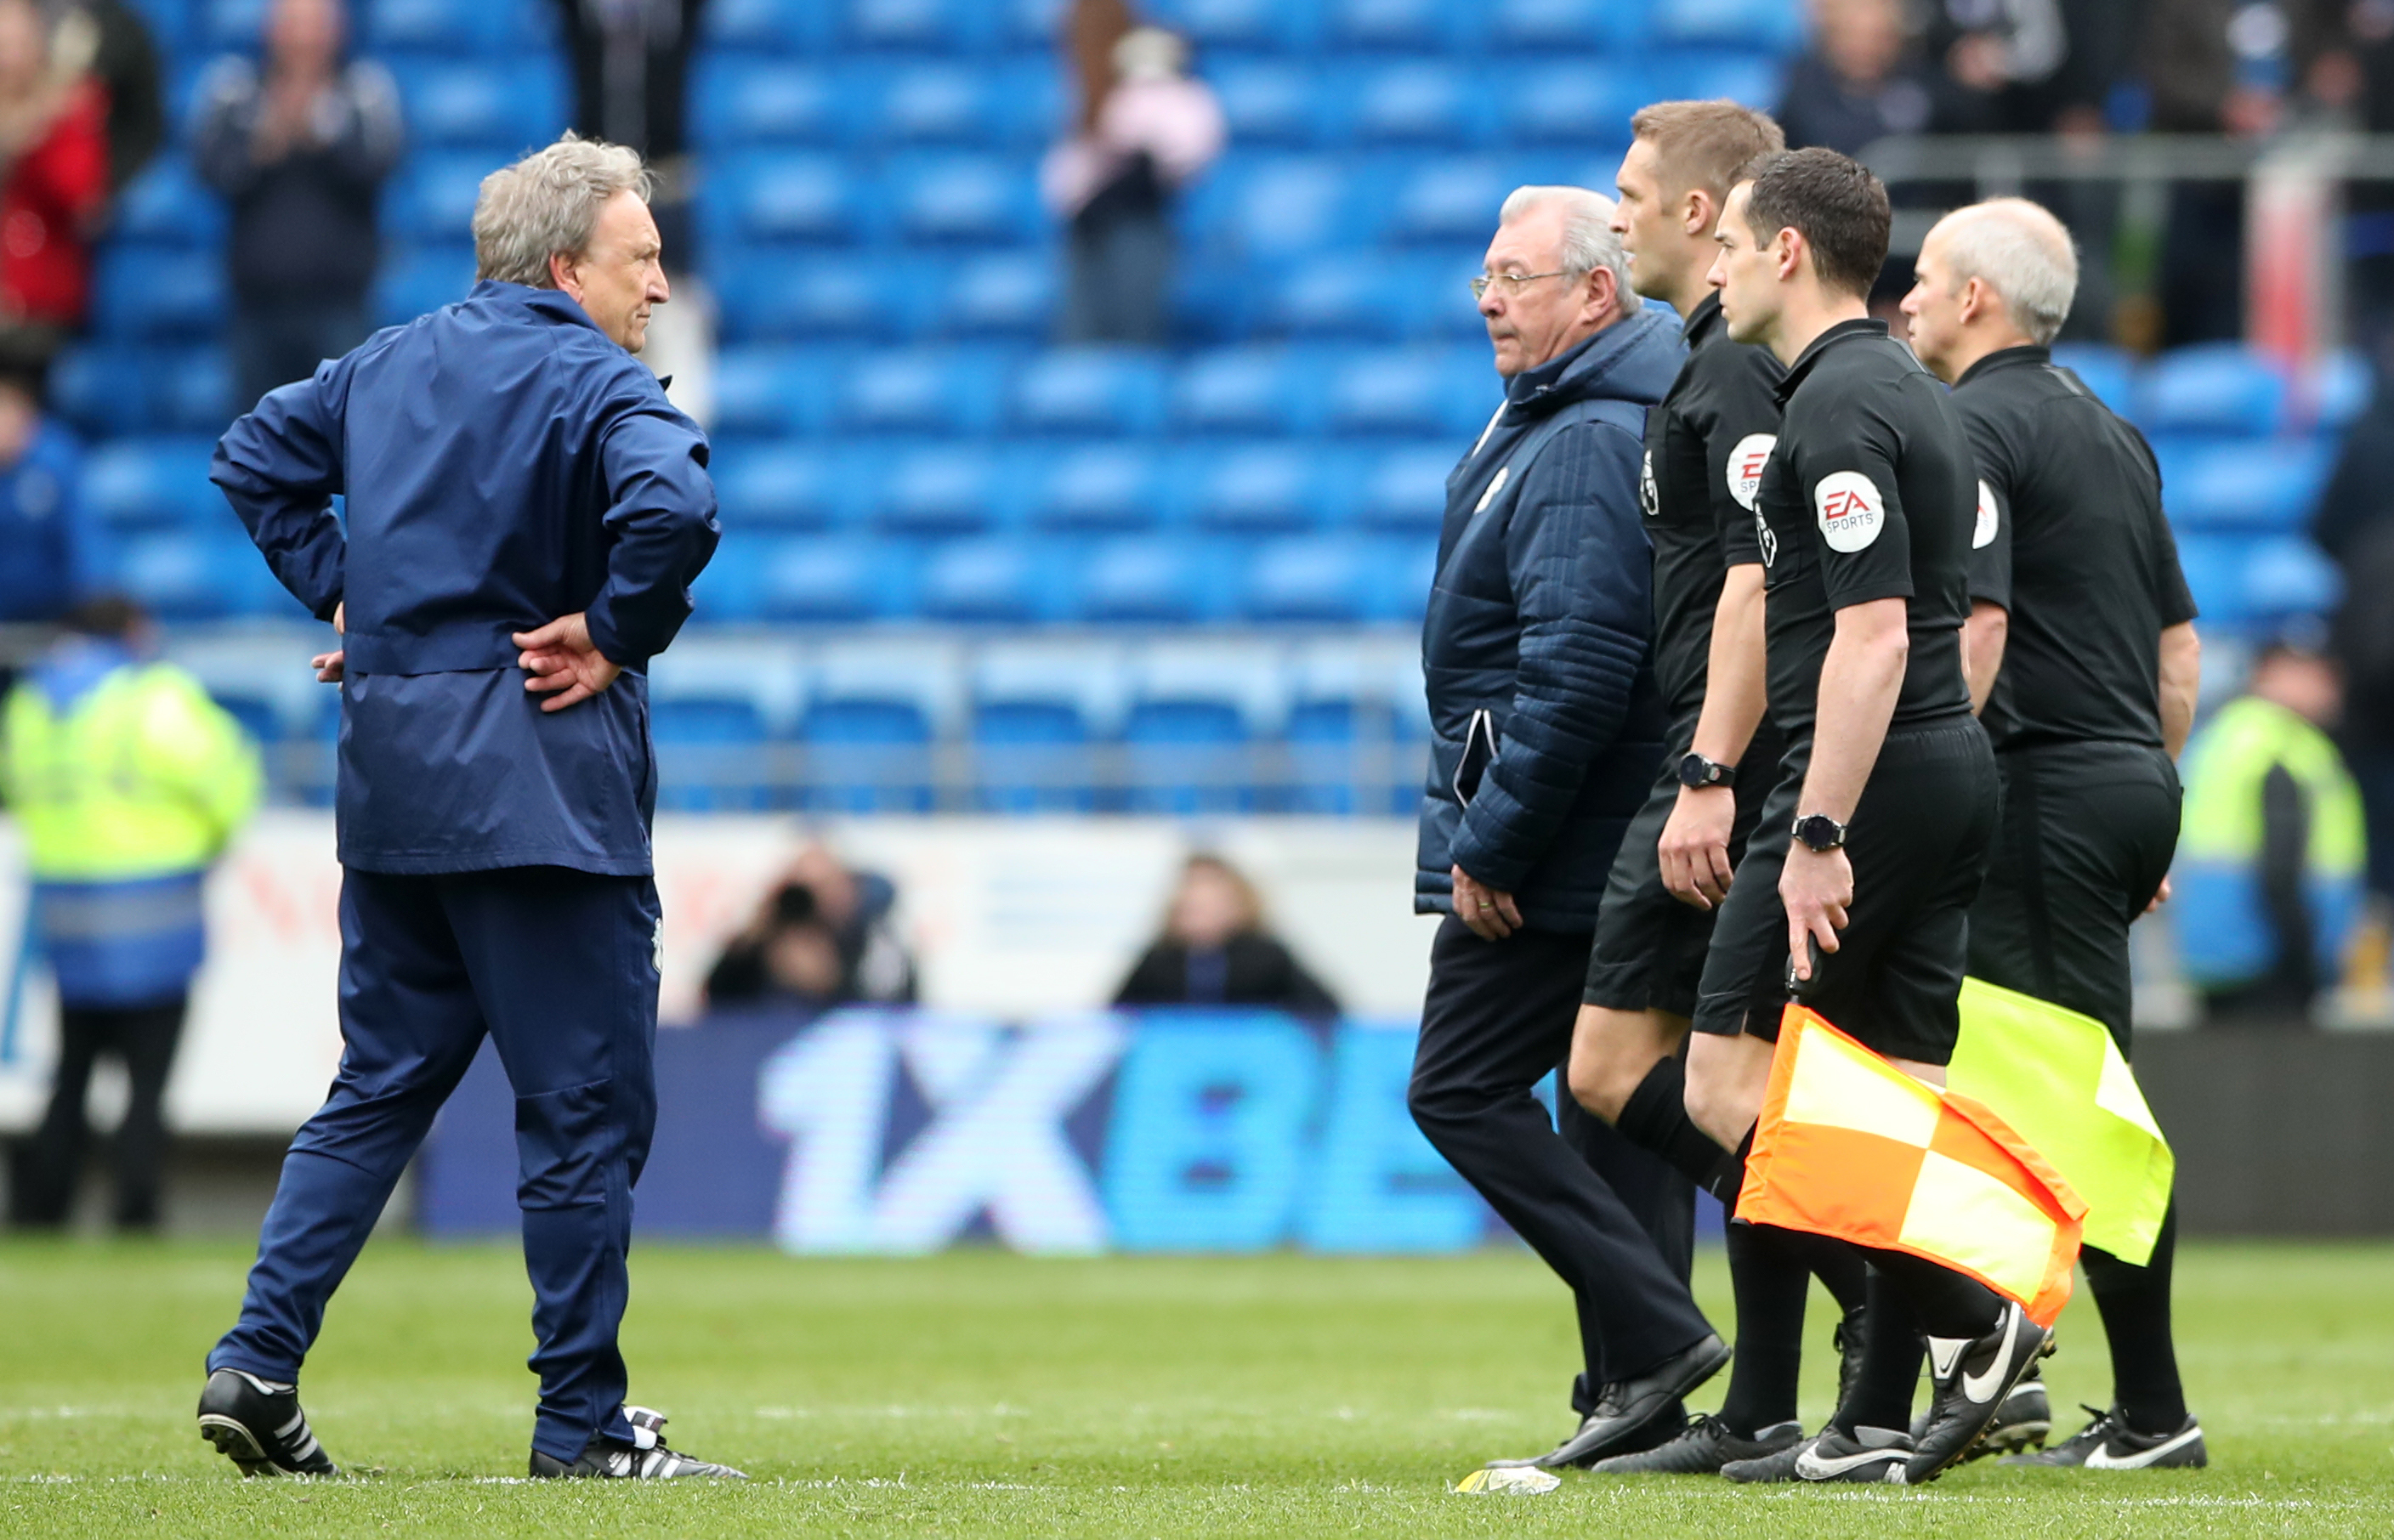 Cardiff City manager Neil Warnock (left) after the Premier League match at the Cardiff City Stadium, Cardiff